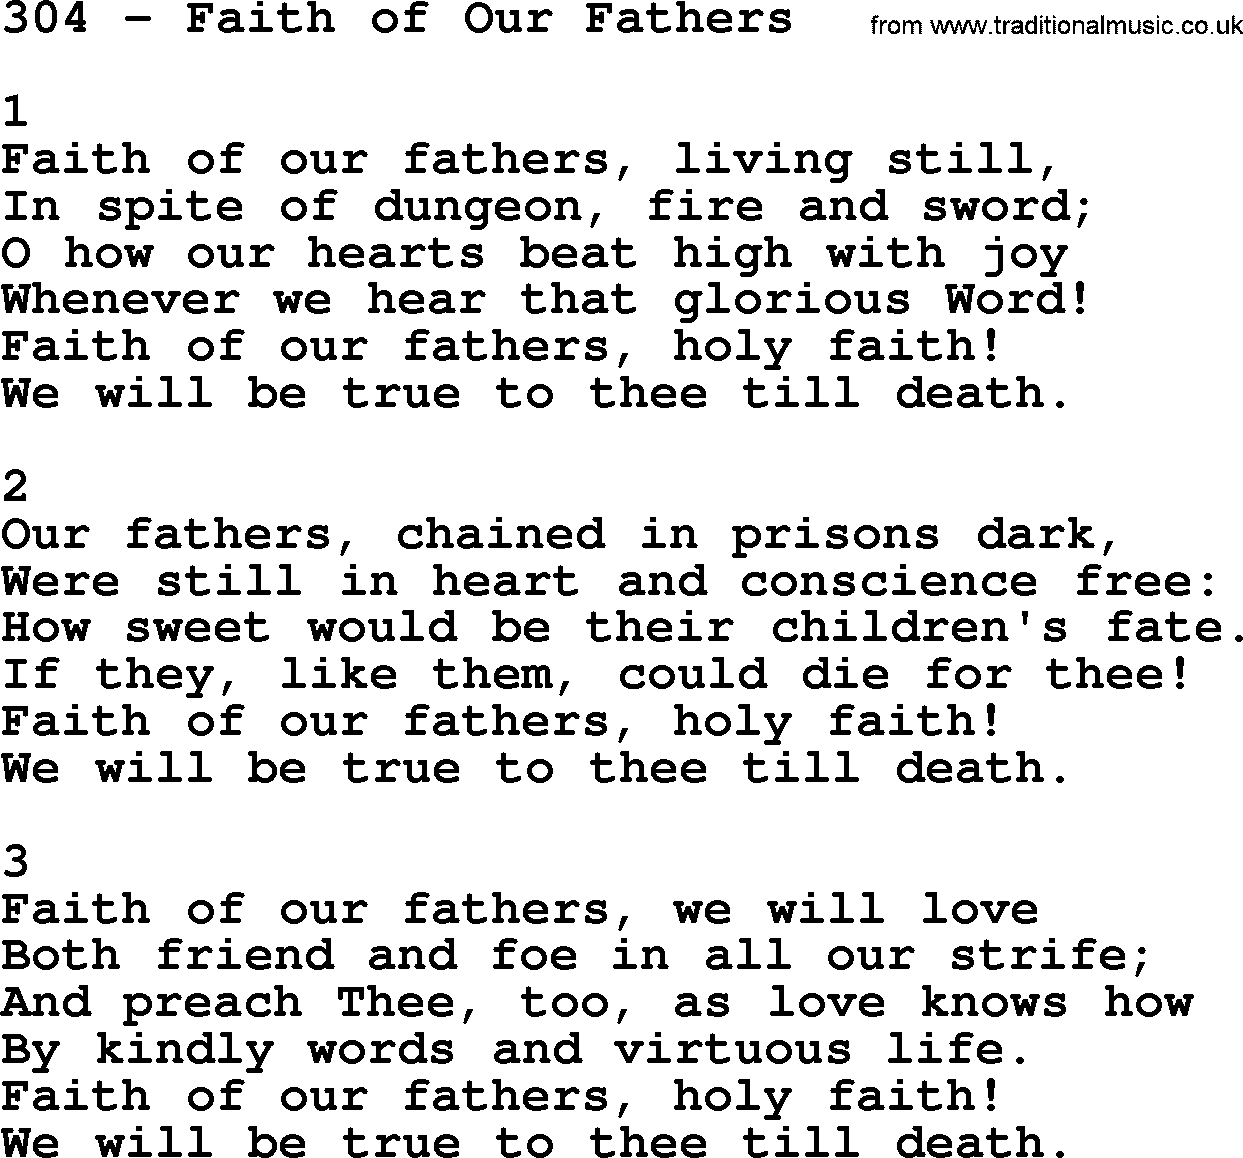 Complete Adventis Hymnal, title: 304-Faith Of Our Fathers, with lyrics, midi, mp3, powerpoints(PPT) and PDF,